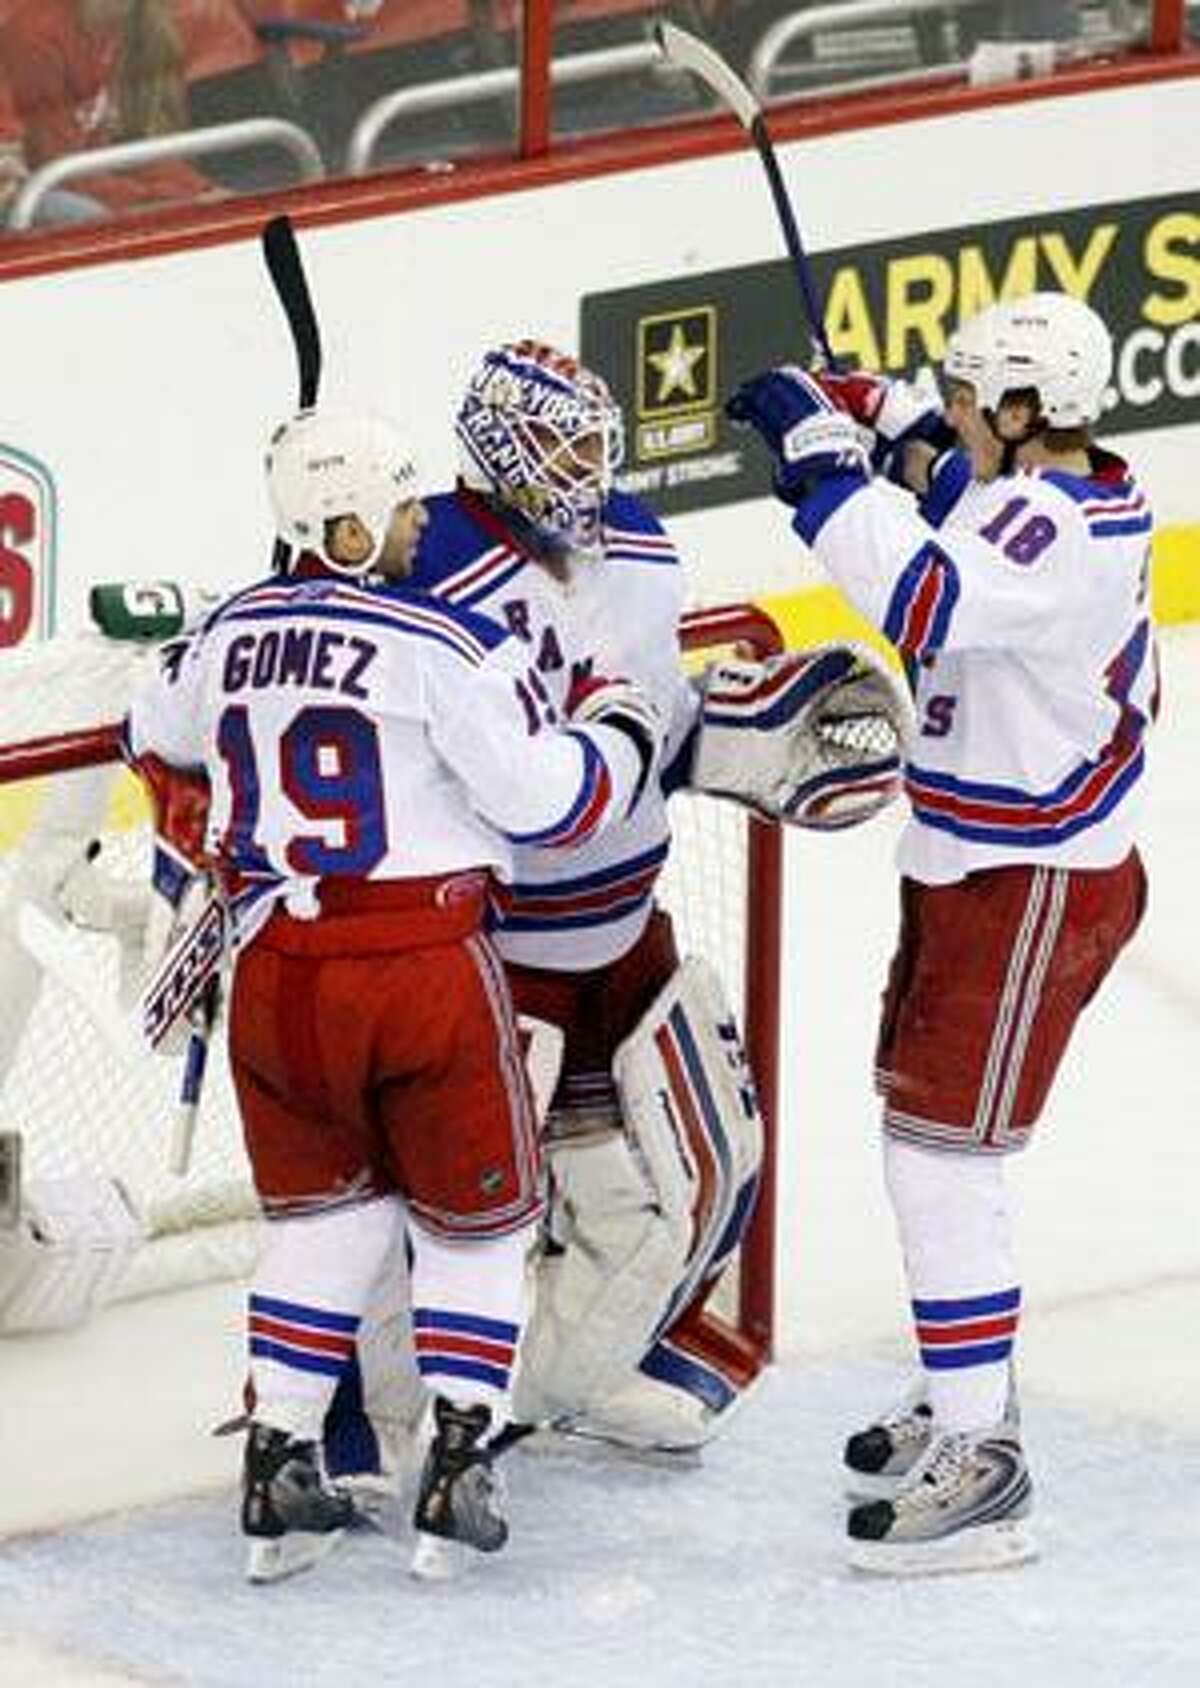 New York Rangers from left to right, Scott Gomez, Henrik Lundqvist and Marc Staal, celebrate following their win against the Washington Capitals in NHL playoff hockey in Washington, Saturday. New York won 1-0.(AP Photo/Pablo Martinez Monsivais)